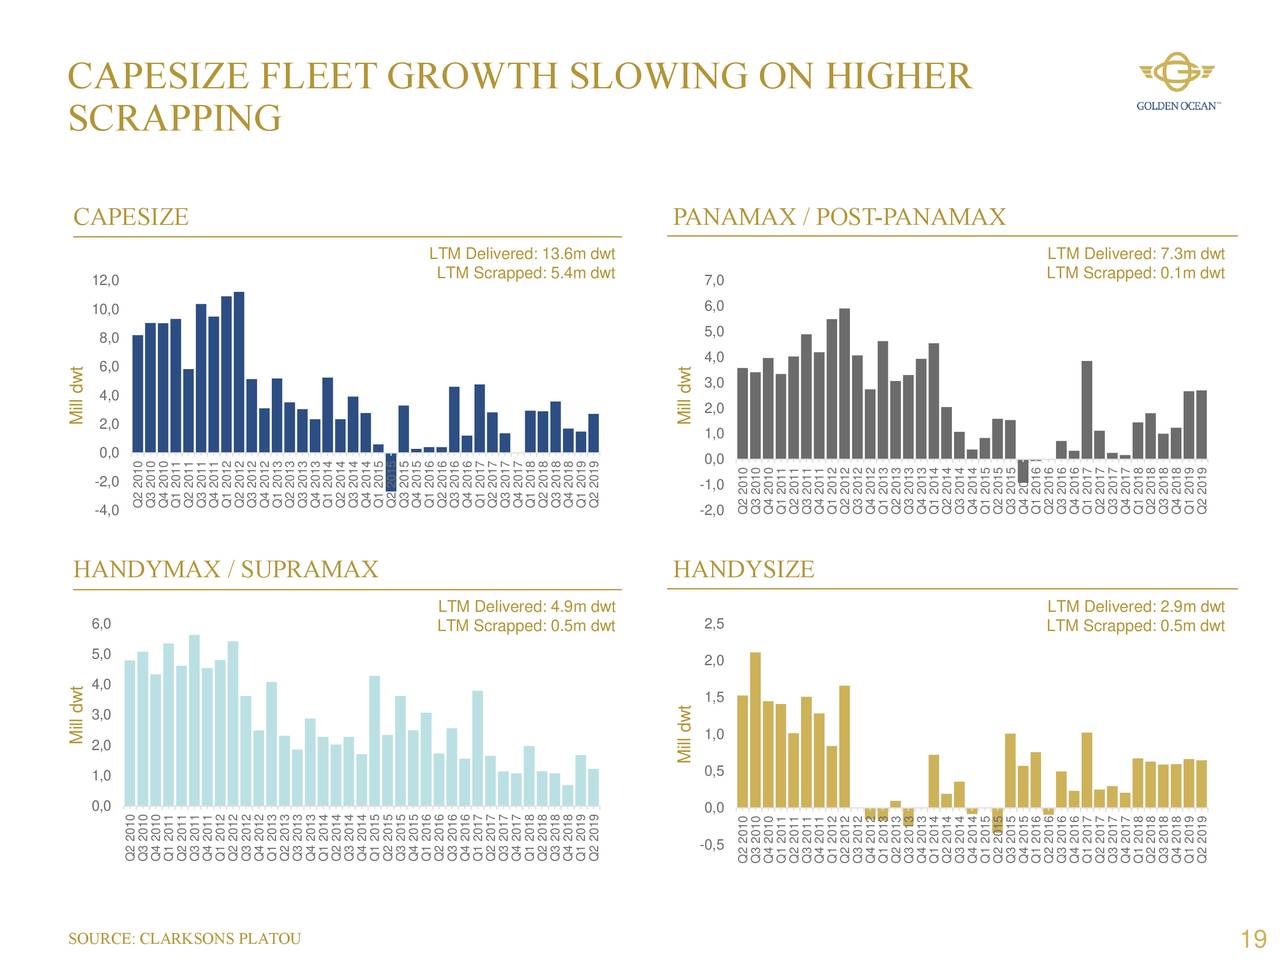 CAPESIZE FLEET GROWTH SLOWING ON HIGHER